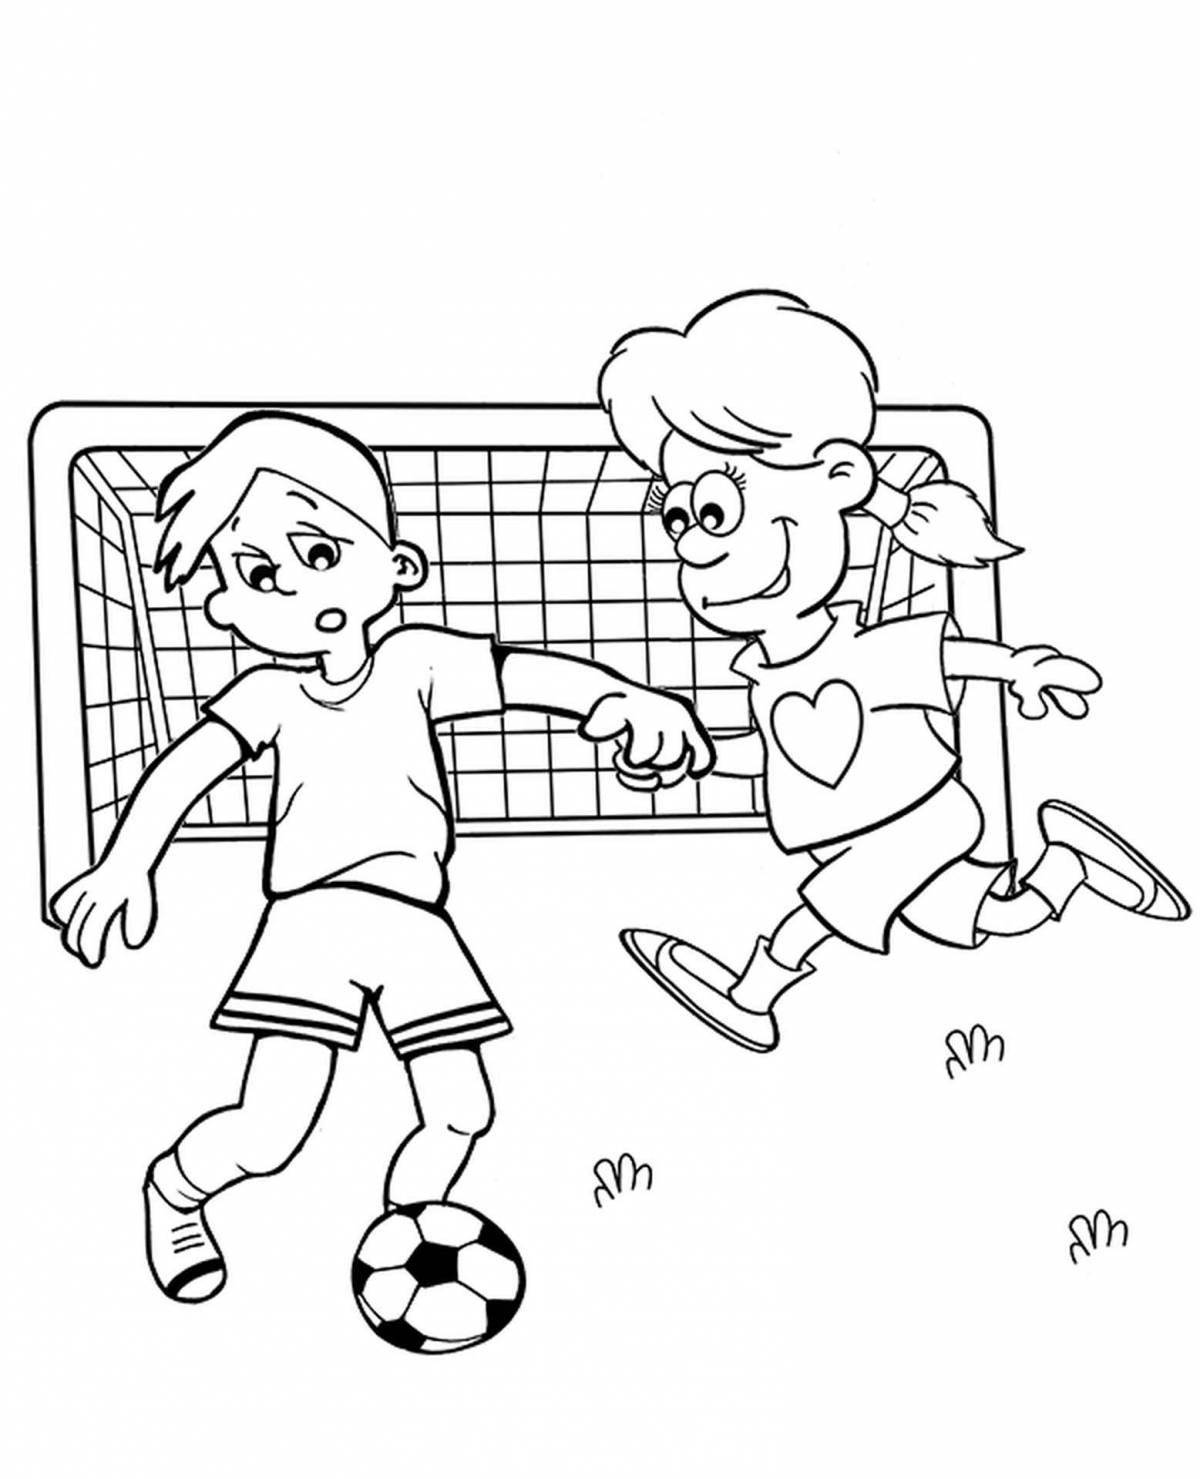 Playful football coloring book for kids